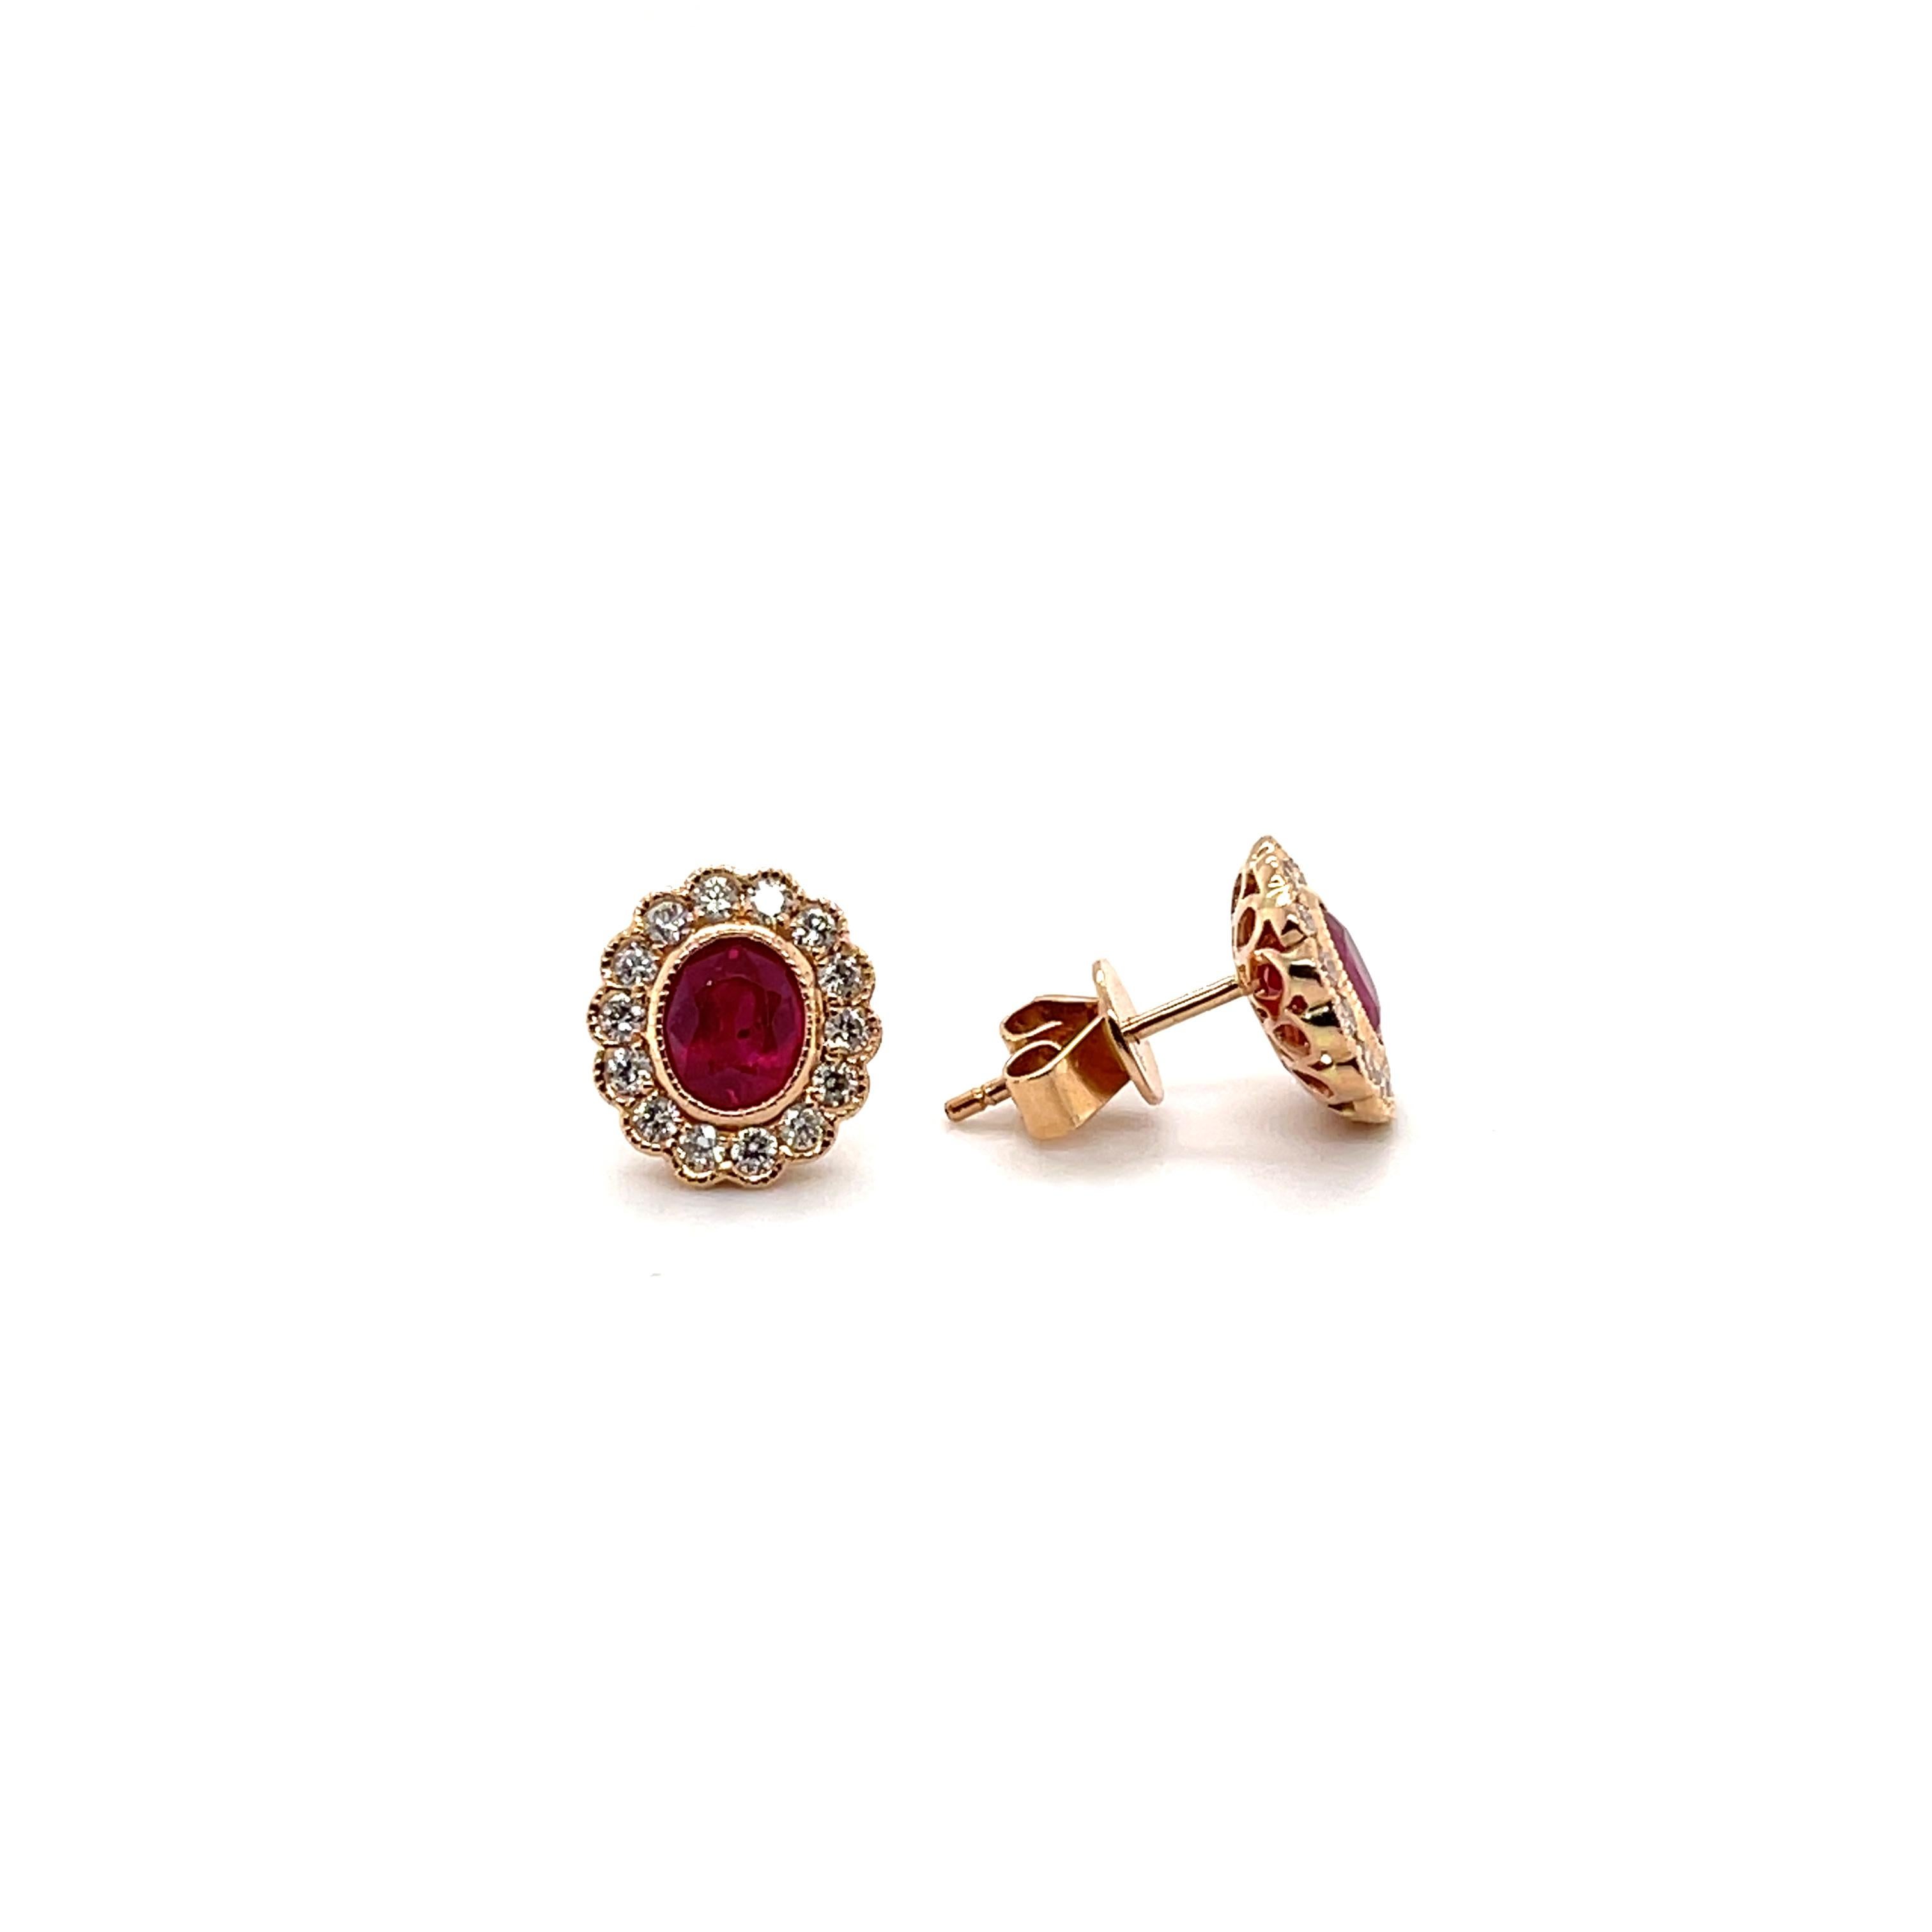 Rubies, crafted with eighteen karat rose gold , featuring a beautiful range of twenty eight claw and rub over set round brilliant cut diamonds, complemented by a stunning polished finish design.

Ruby Weight: 1.40ct 
Ruby Colour: 